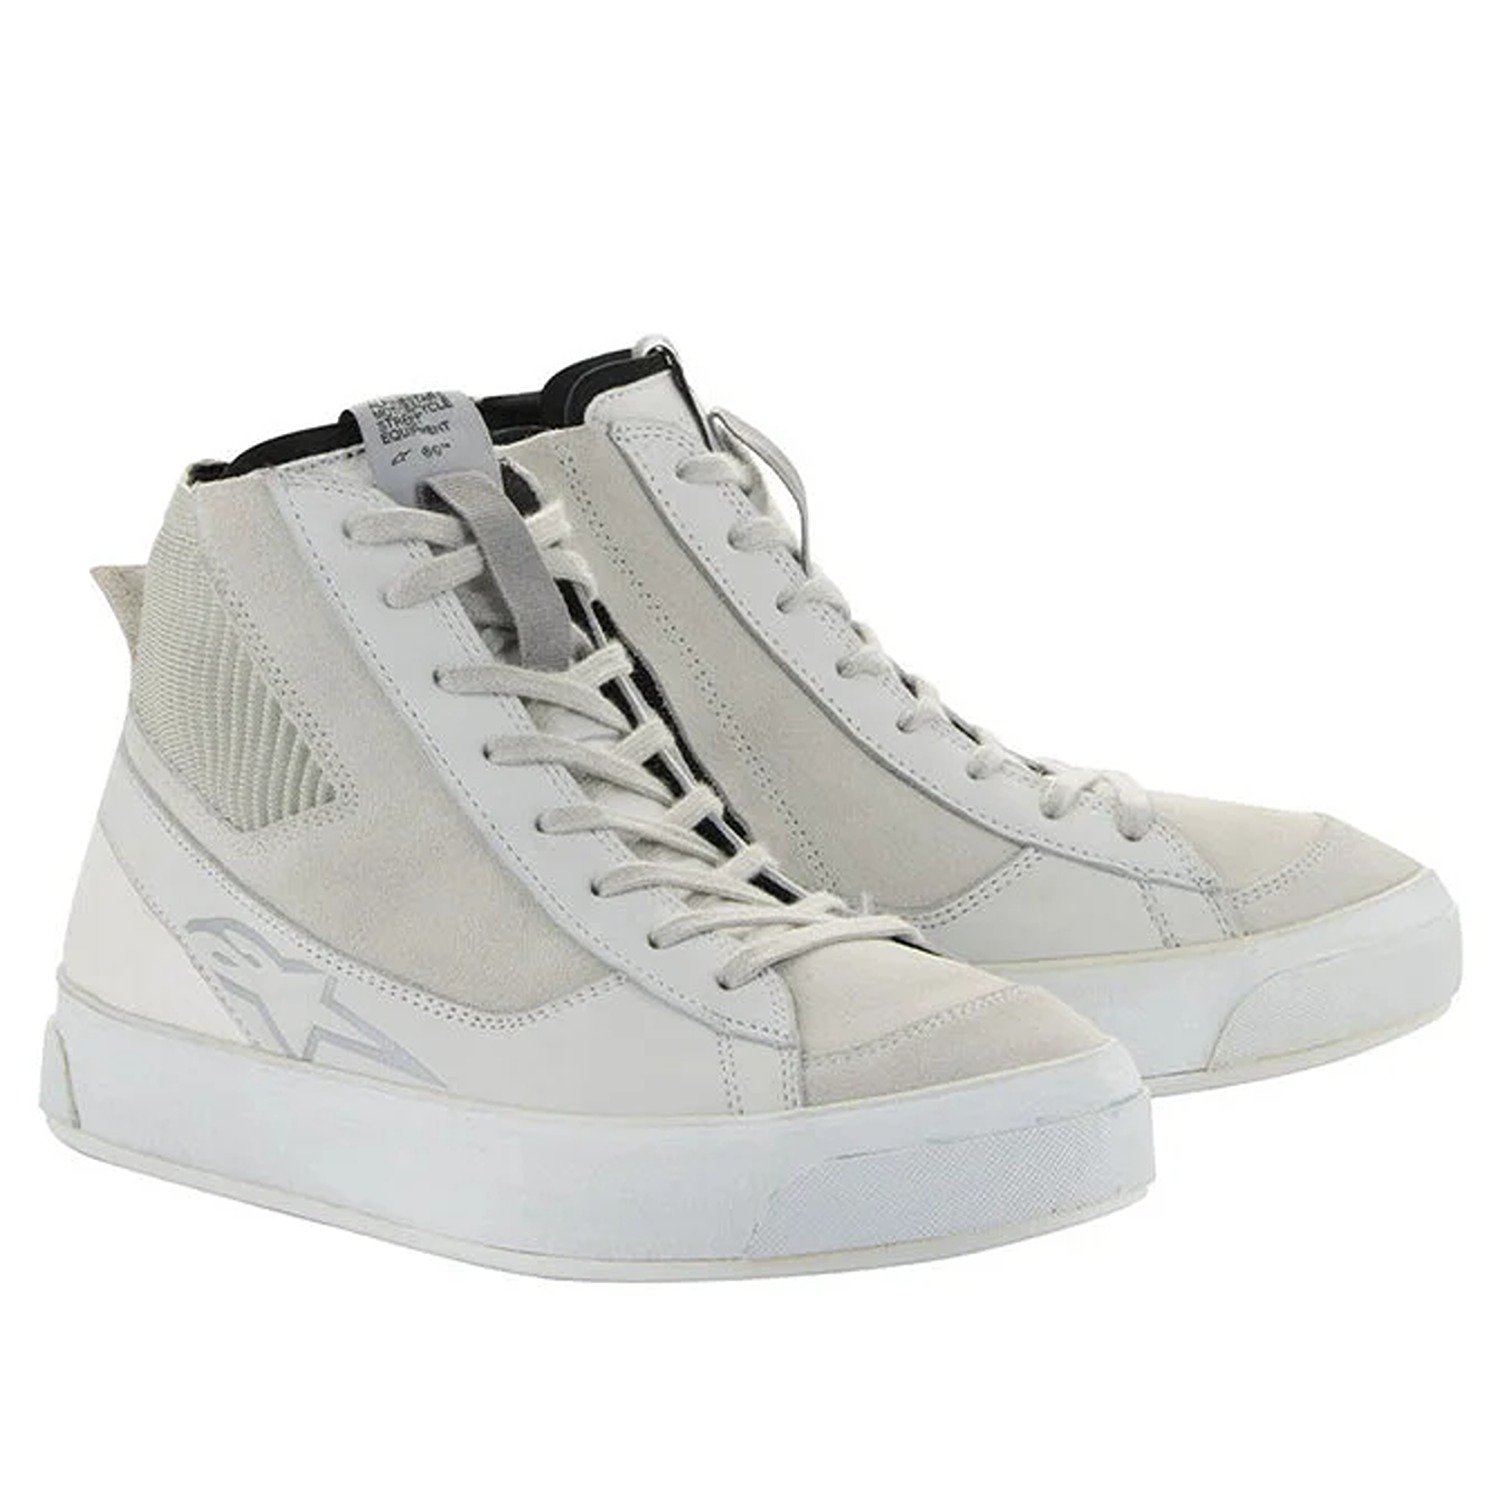 Image of Alpinestars Stated Shoes White Cool Gray Size US 95 EN